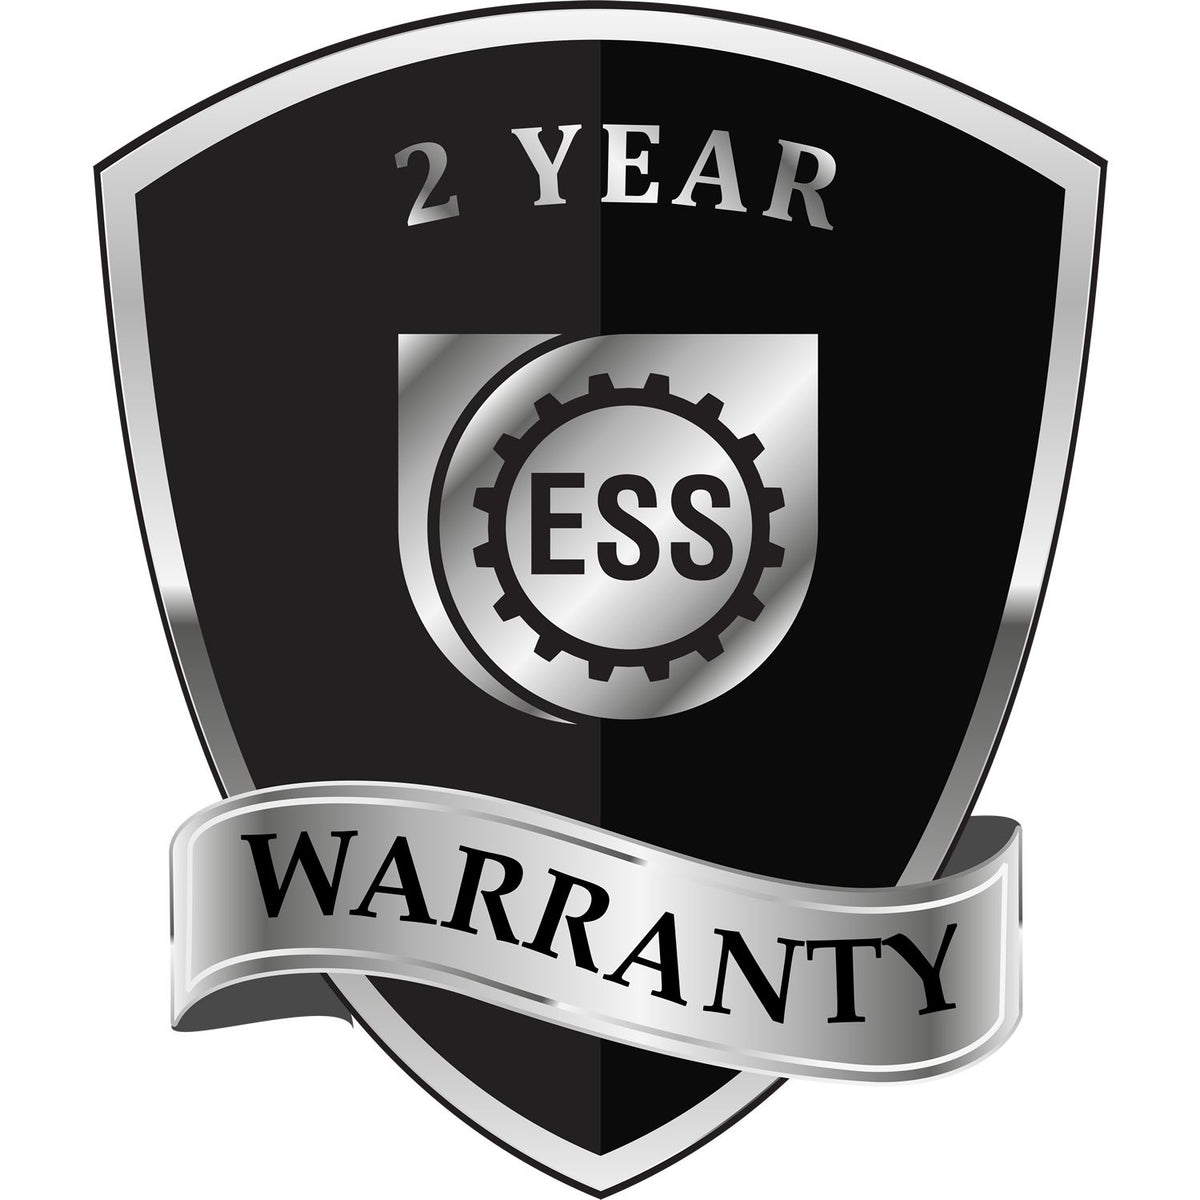 A black and silver badge or emblem showing warranty information for the Long Reach Florida Geology Seal